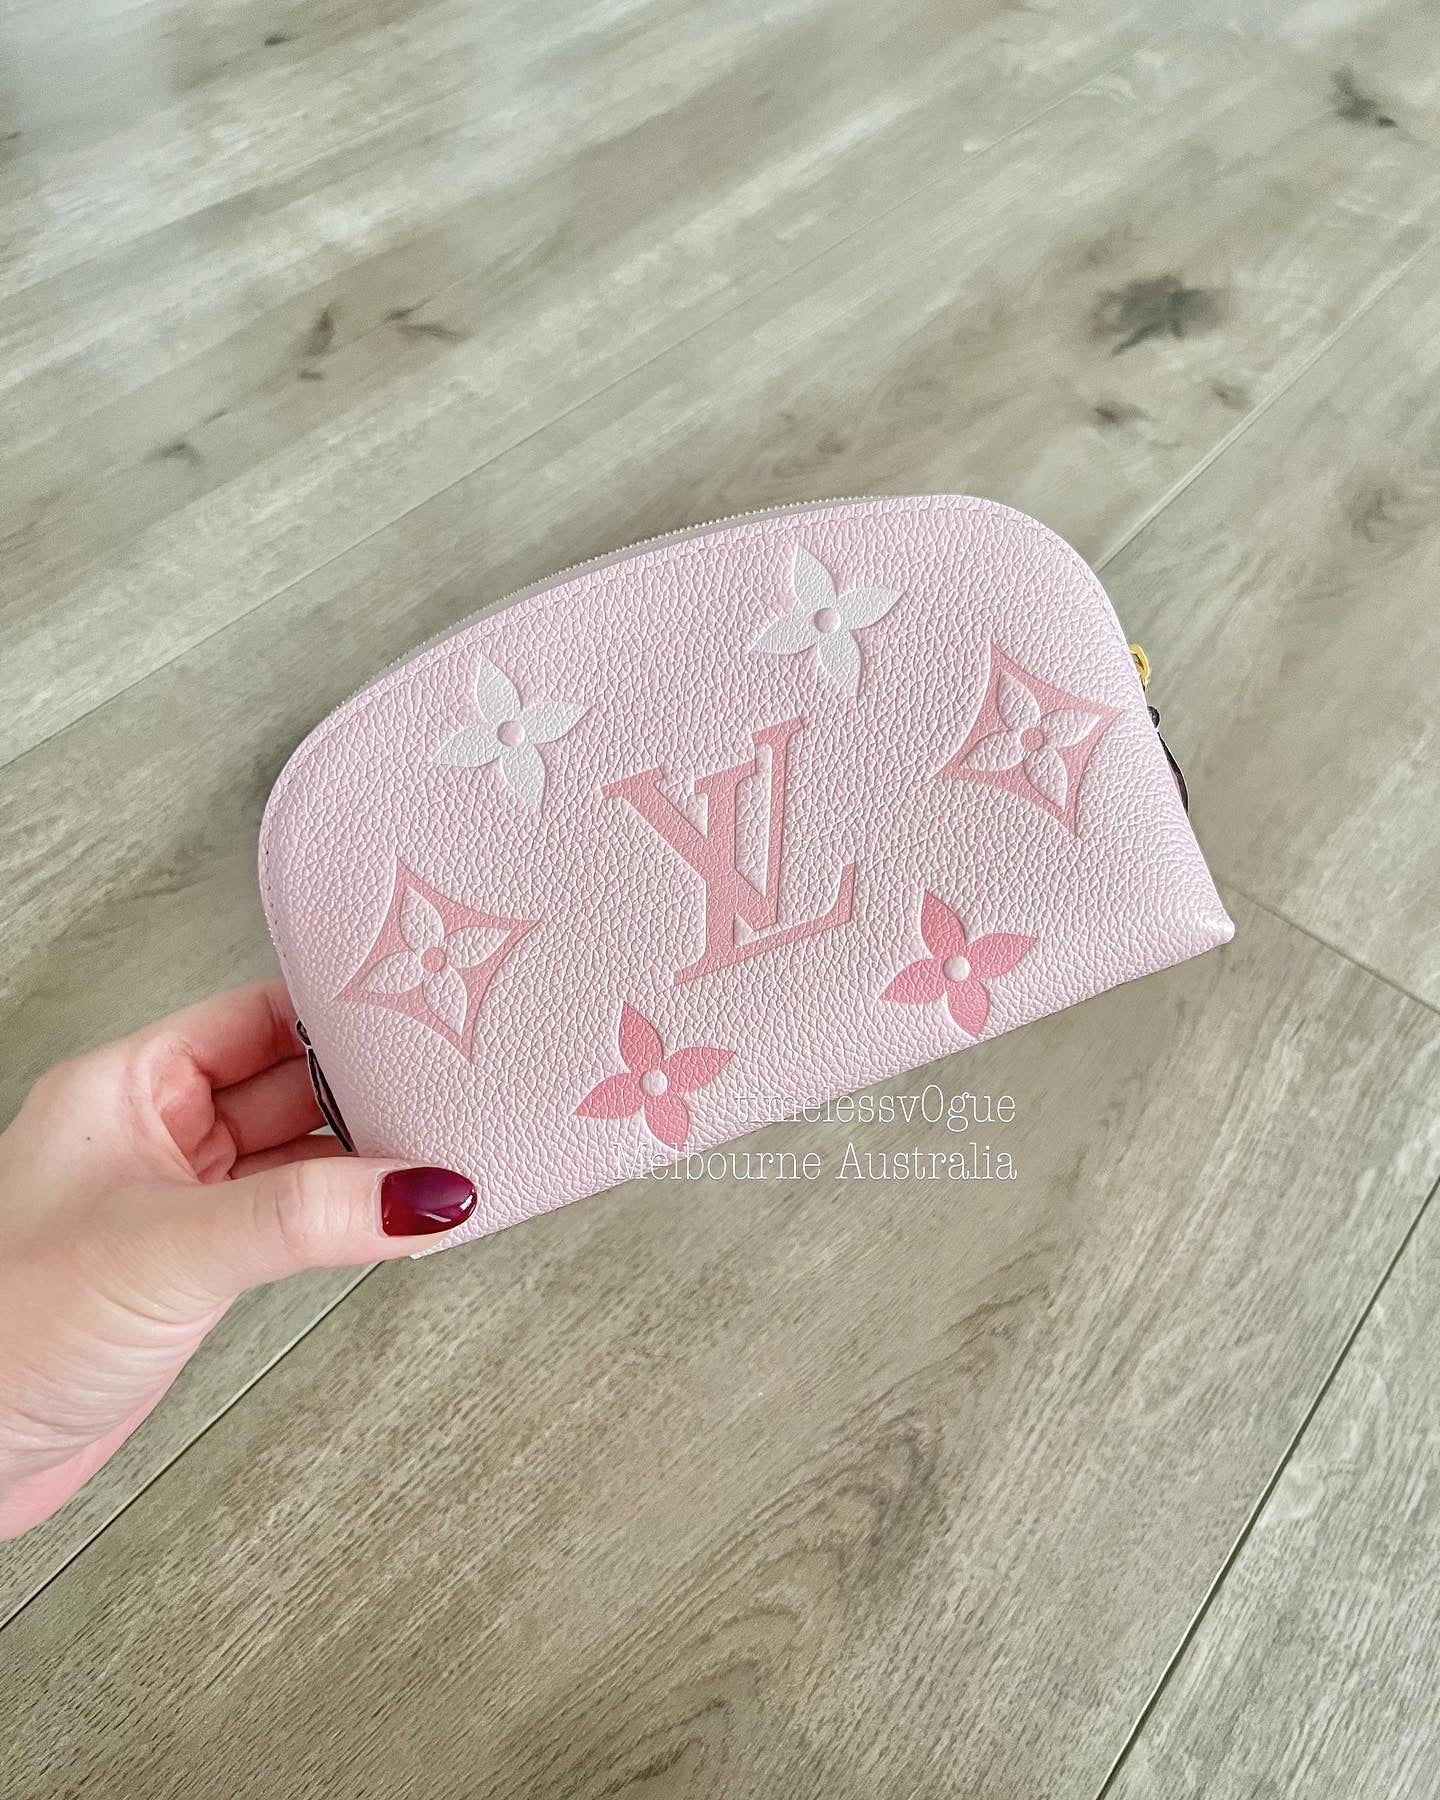 Louis Vuitton Cosmetic Pouch